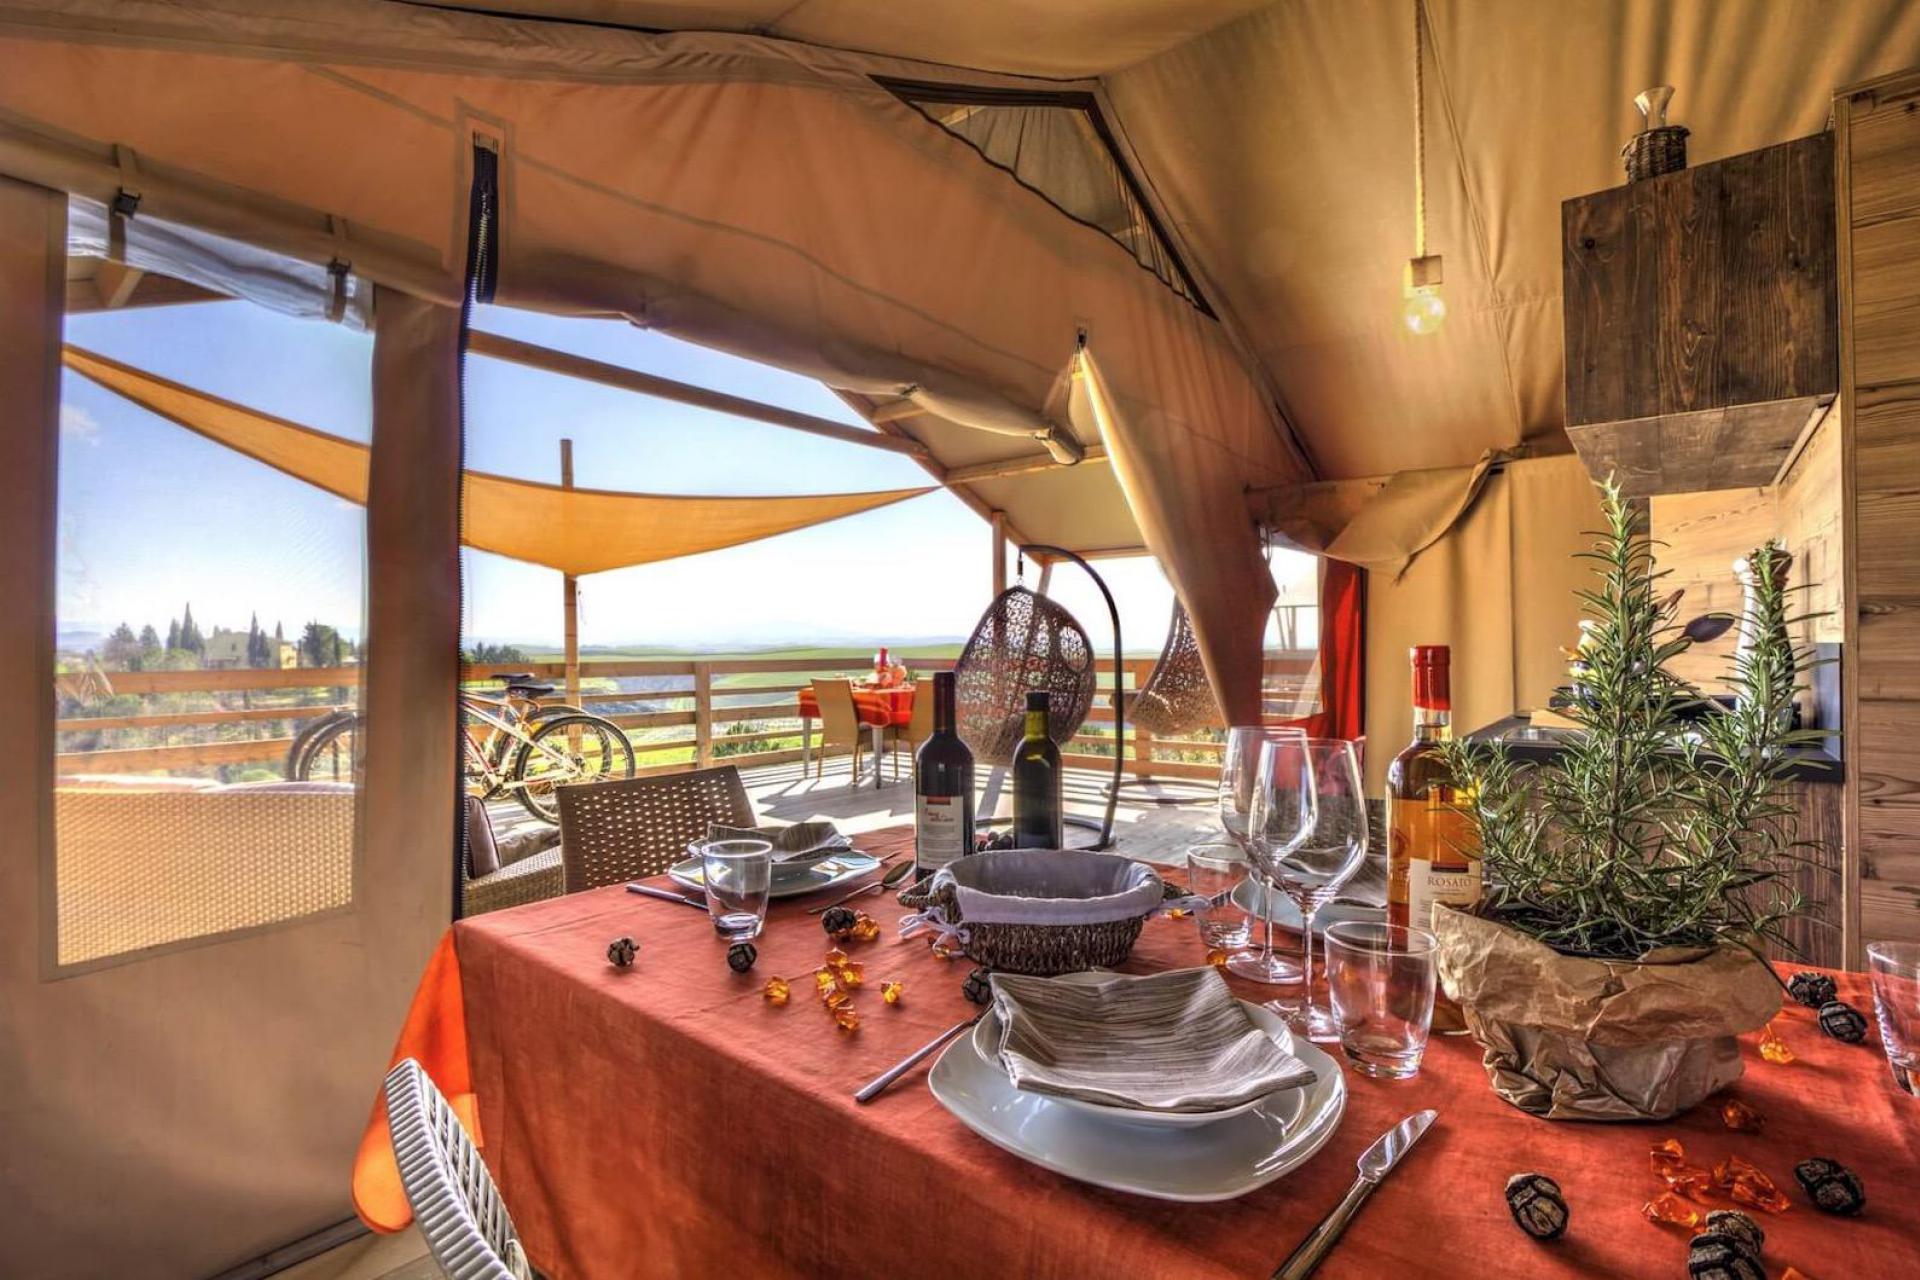 3. Luxury Safari tent in the Tuscany countryside